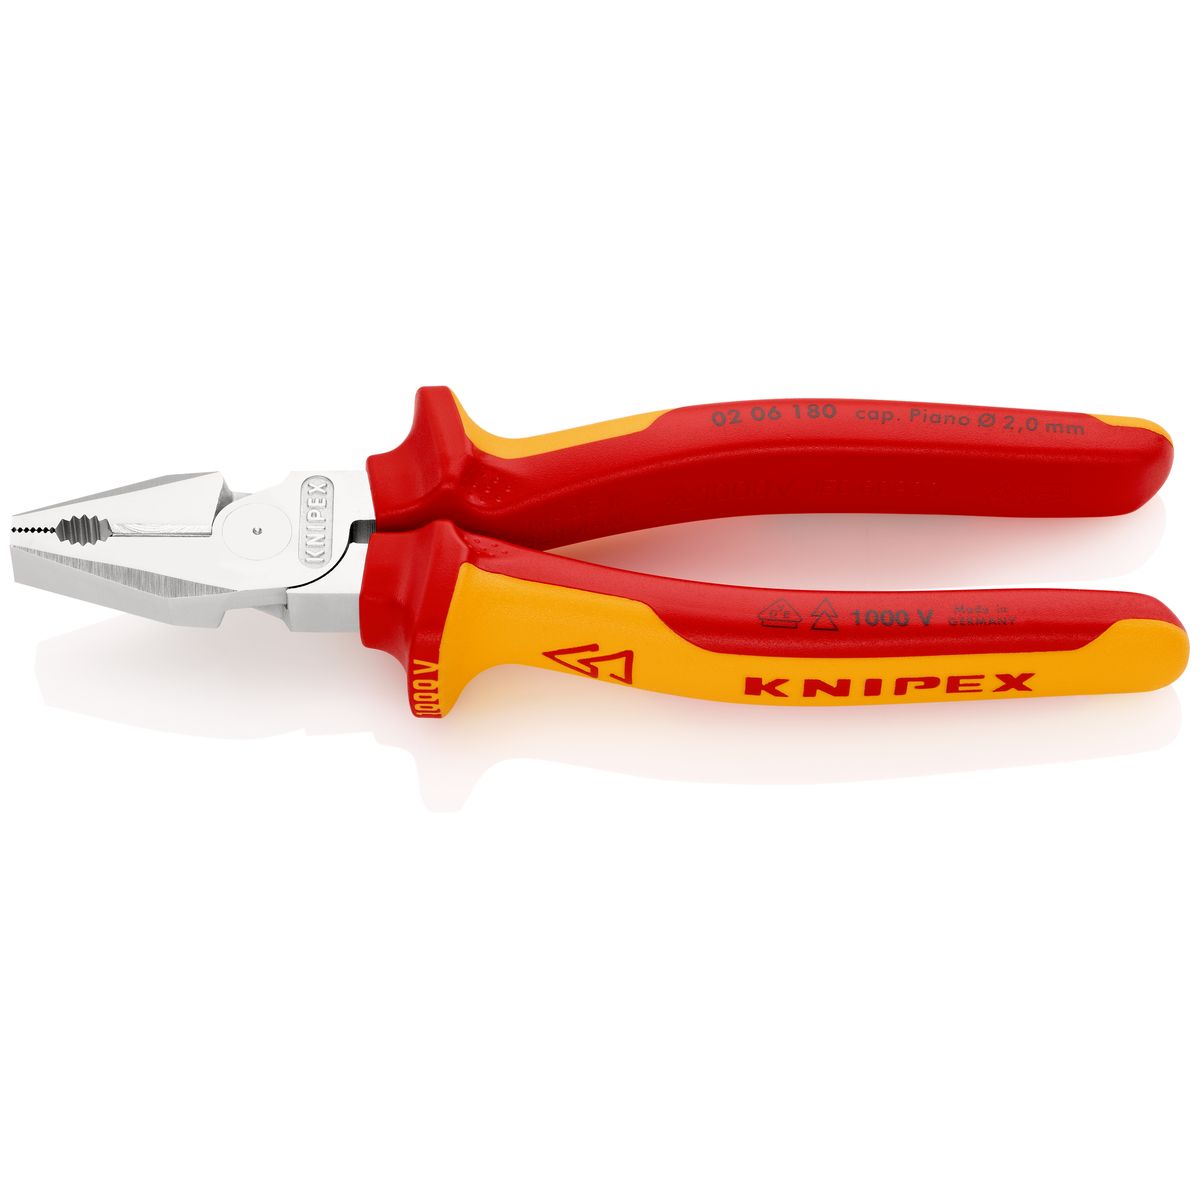 COMBINATION PLIERS 0206180 Knipex